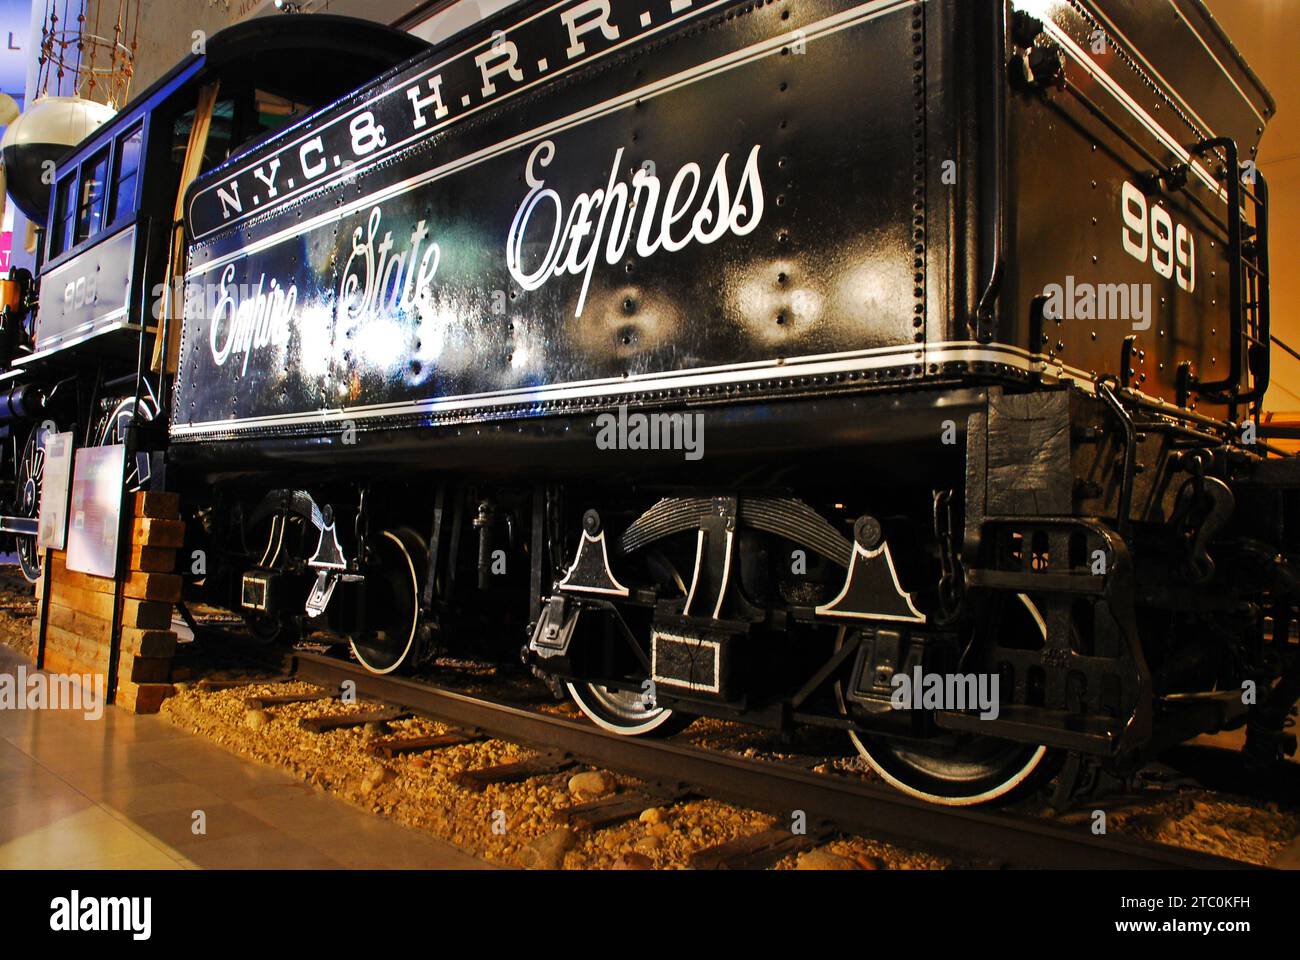 The Empire Express, a steam locomotive, stands in the Chicago Museum of Science and Industry Stock Photo